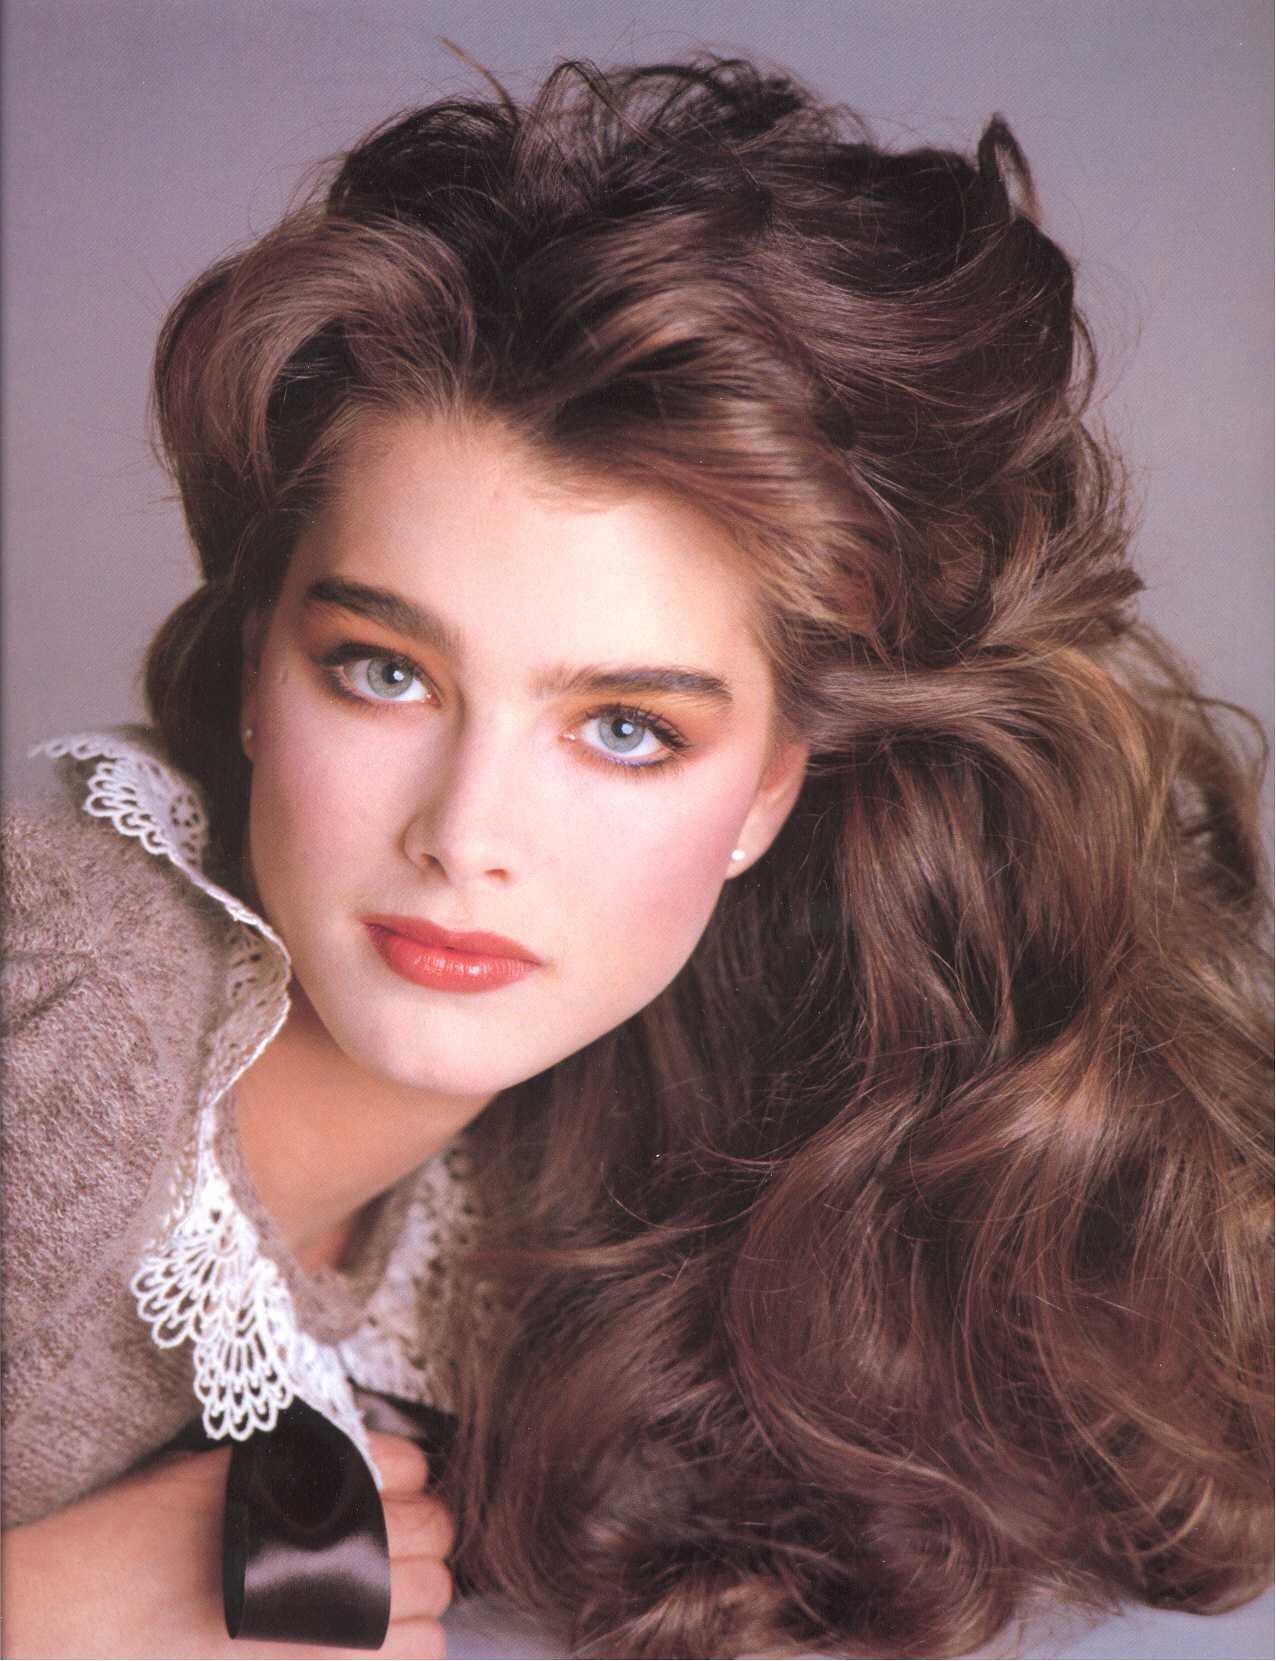 BrookeShields - Brooke Shields Face of the 80's | Facebook